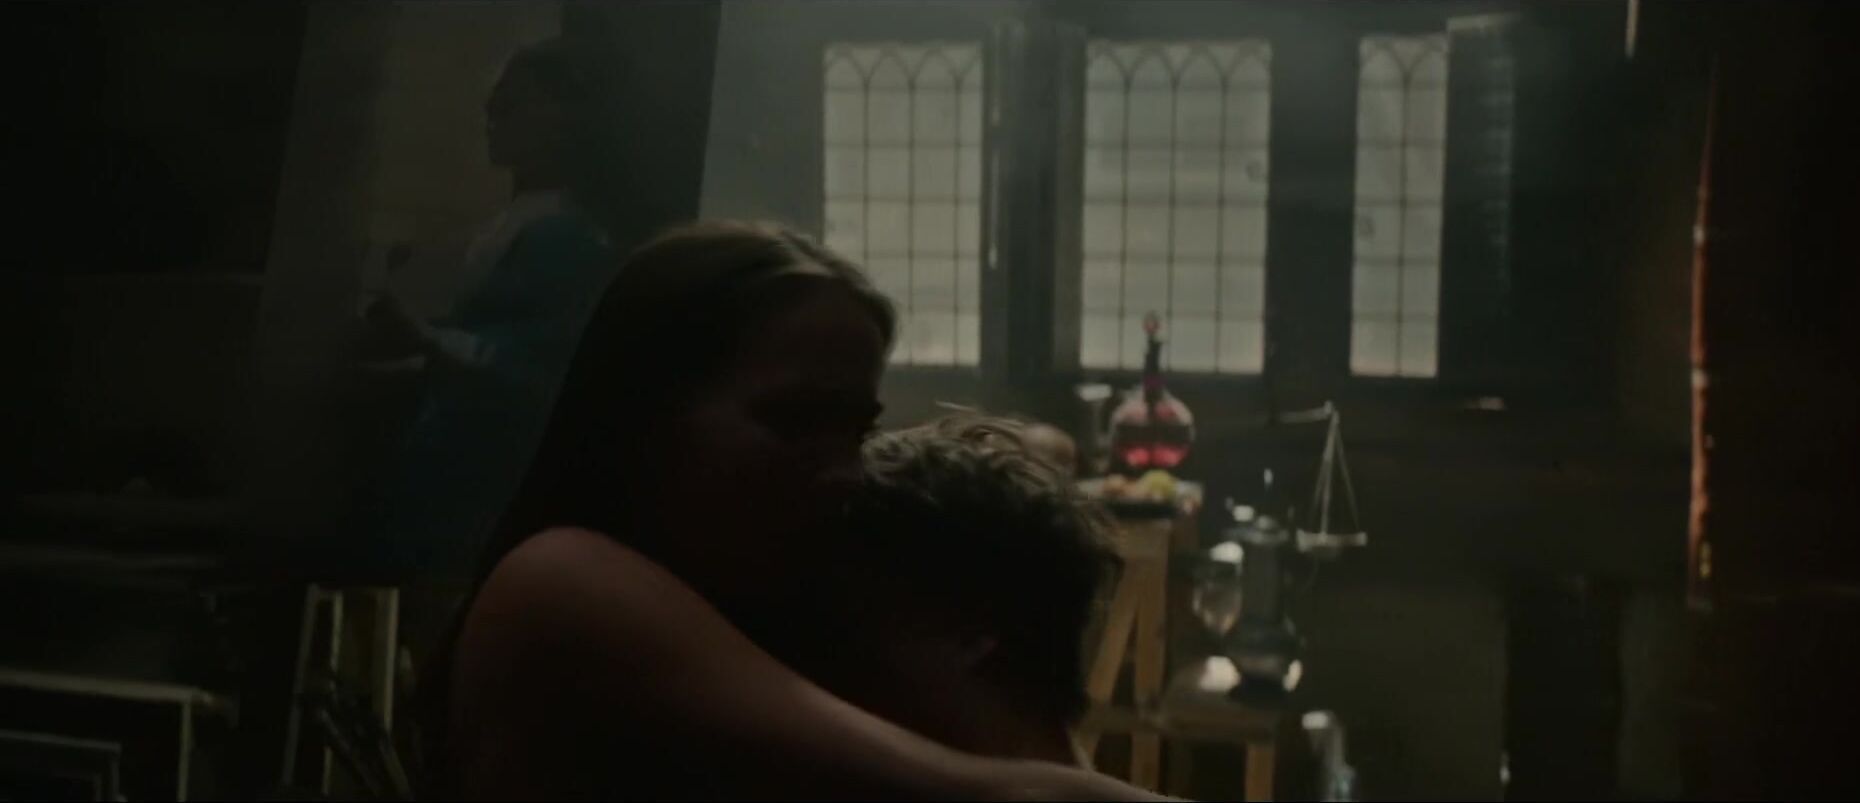 Thick Hot sex scenes of Alicia Vikander and other actresses being penetrated in Tulip Fever Gaybukkake